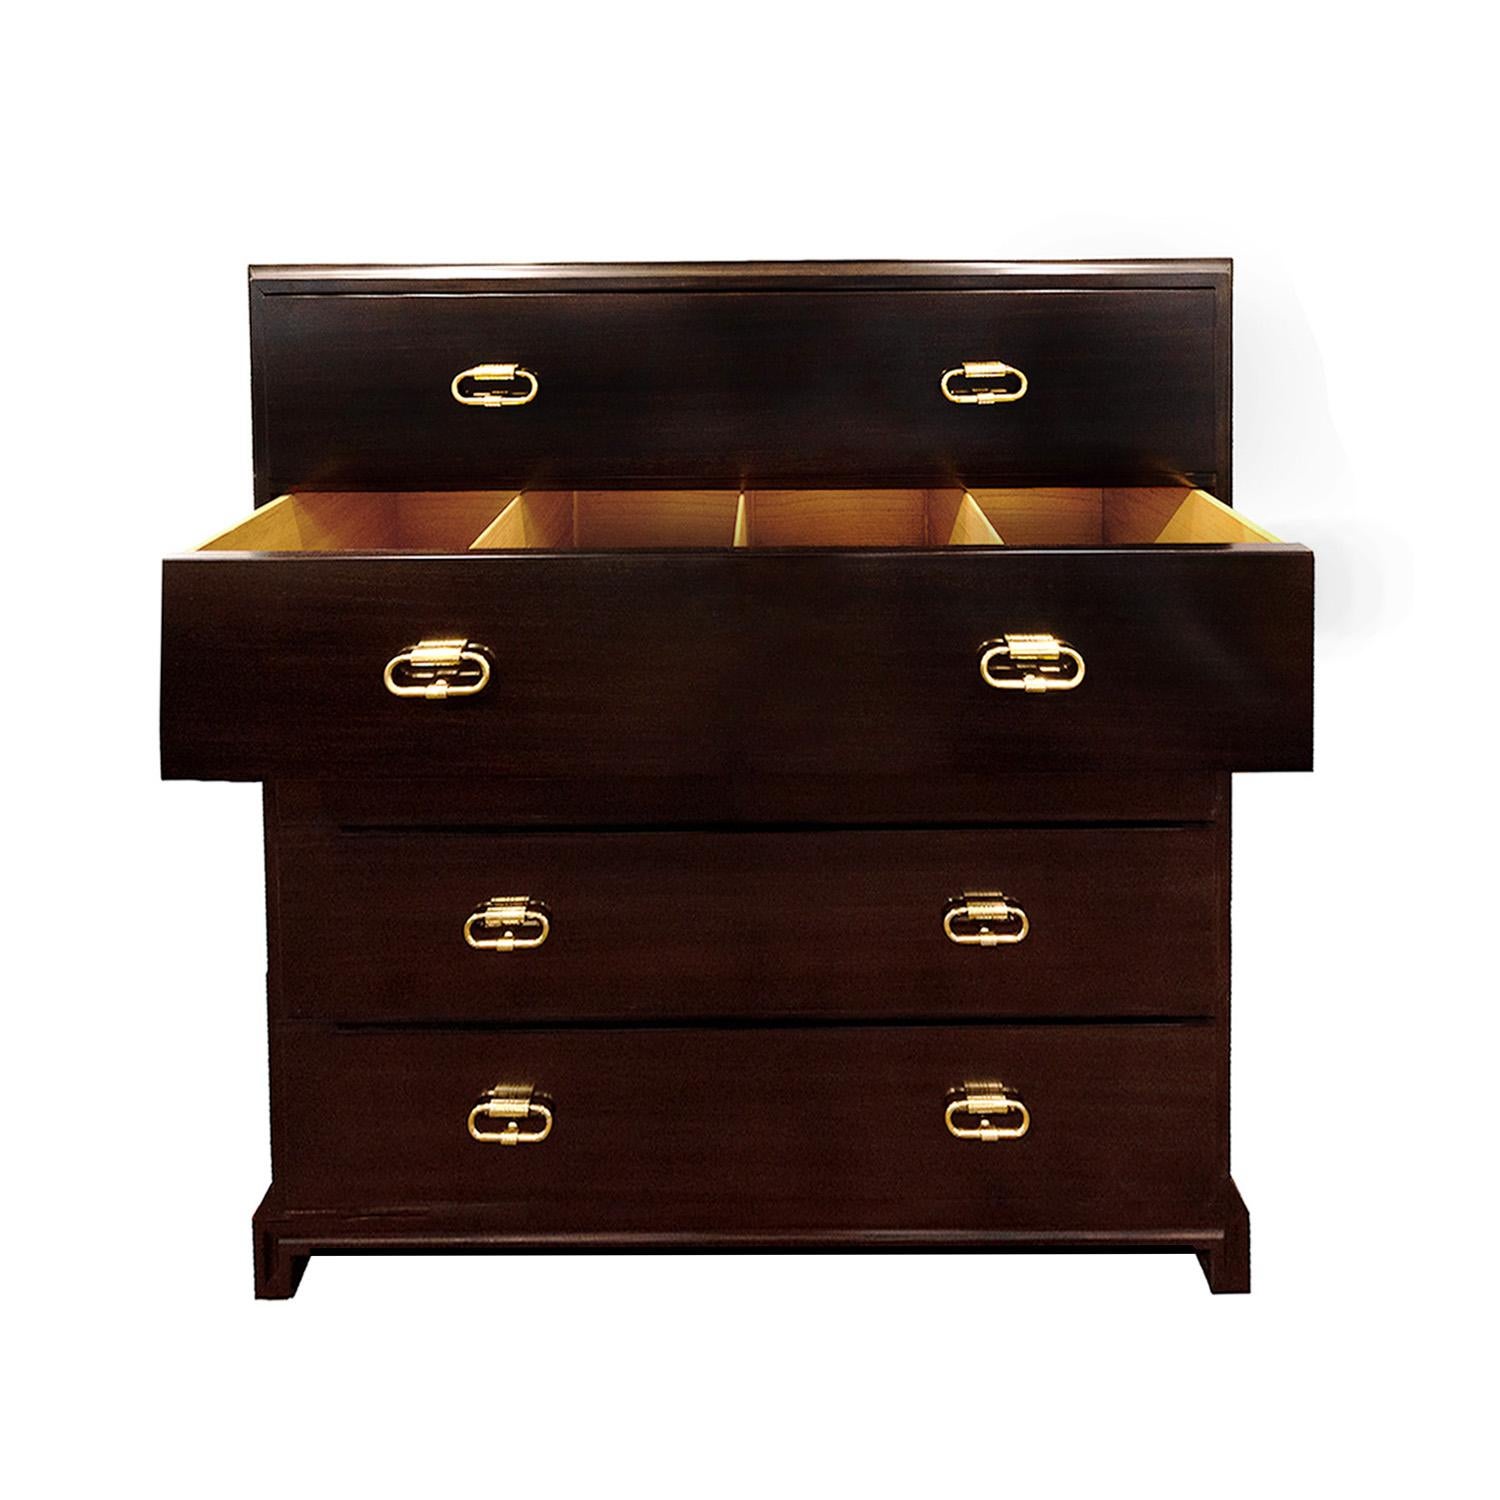 Hand-Crafted Tommi Parzinger Elegant Chest of Drawers with Etched Brass Pulls 1950s 'Signed' For Sale